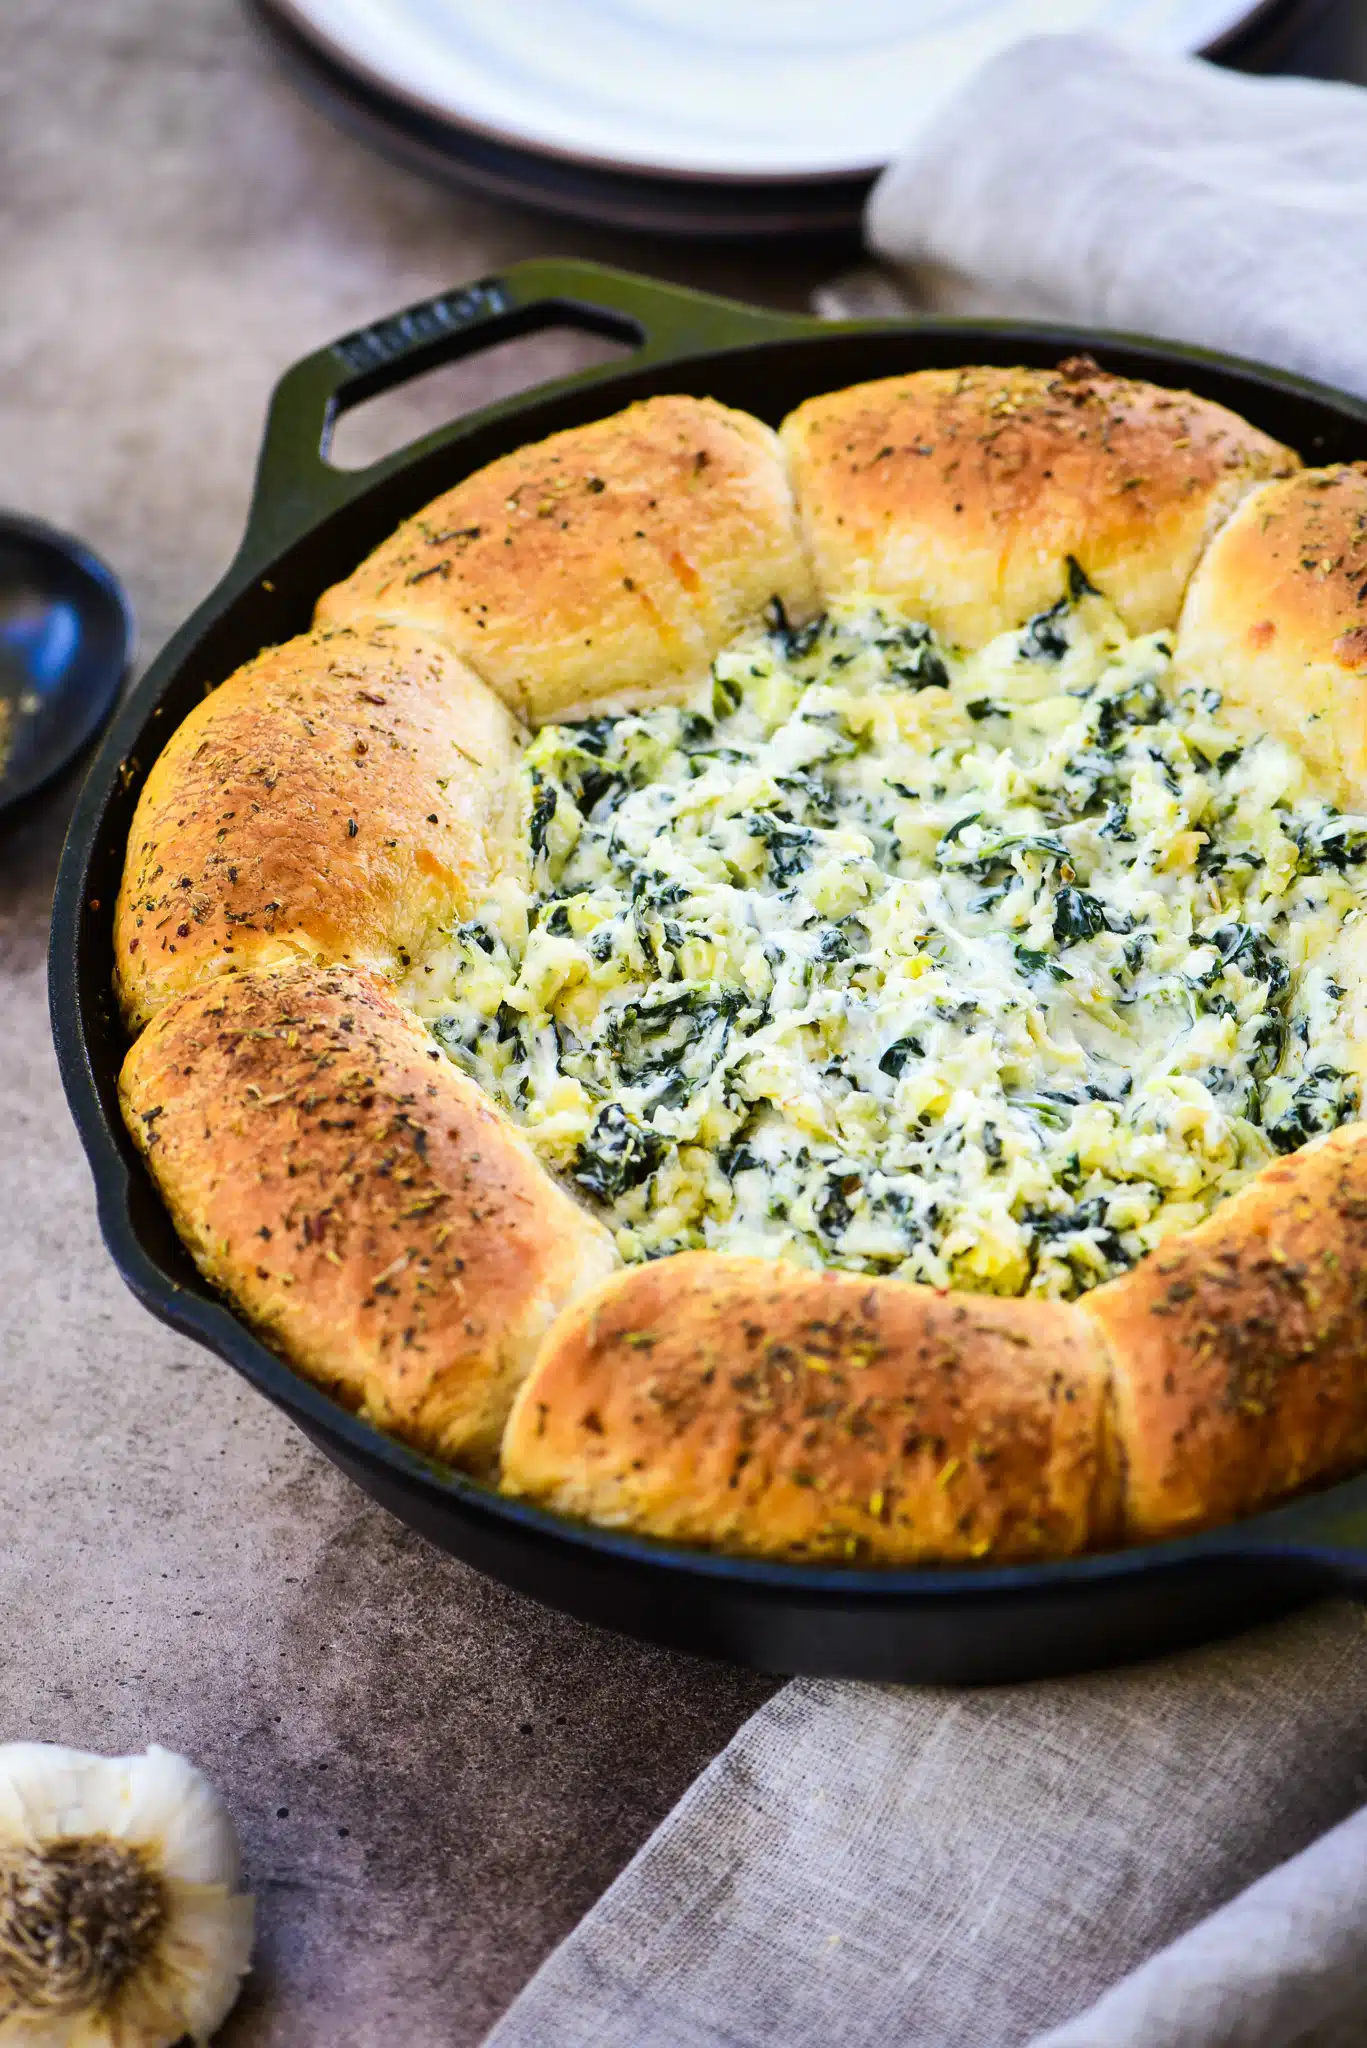 Spinach Artichoke Dip with Cheese-Stuffed Biscuits